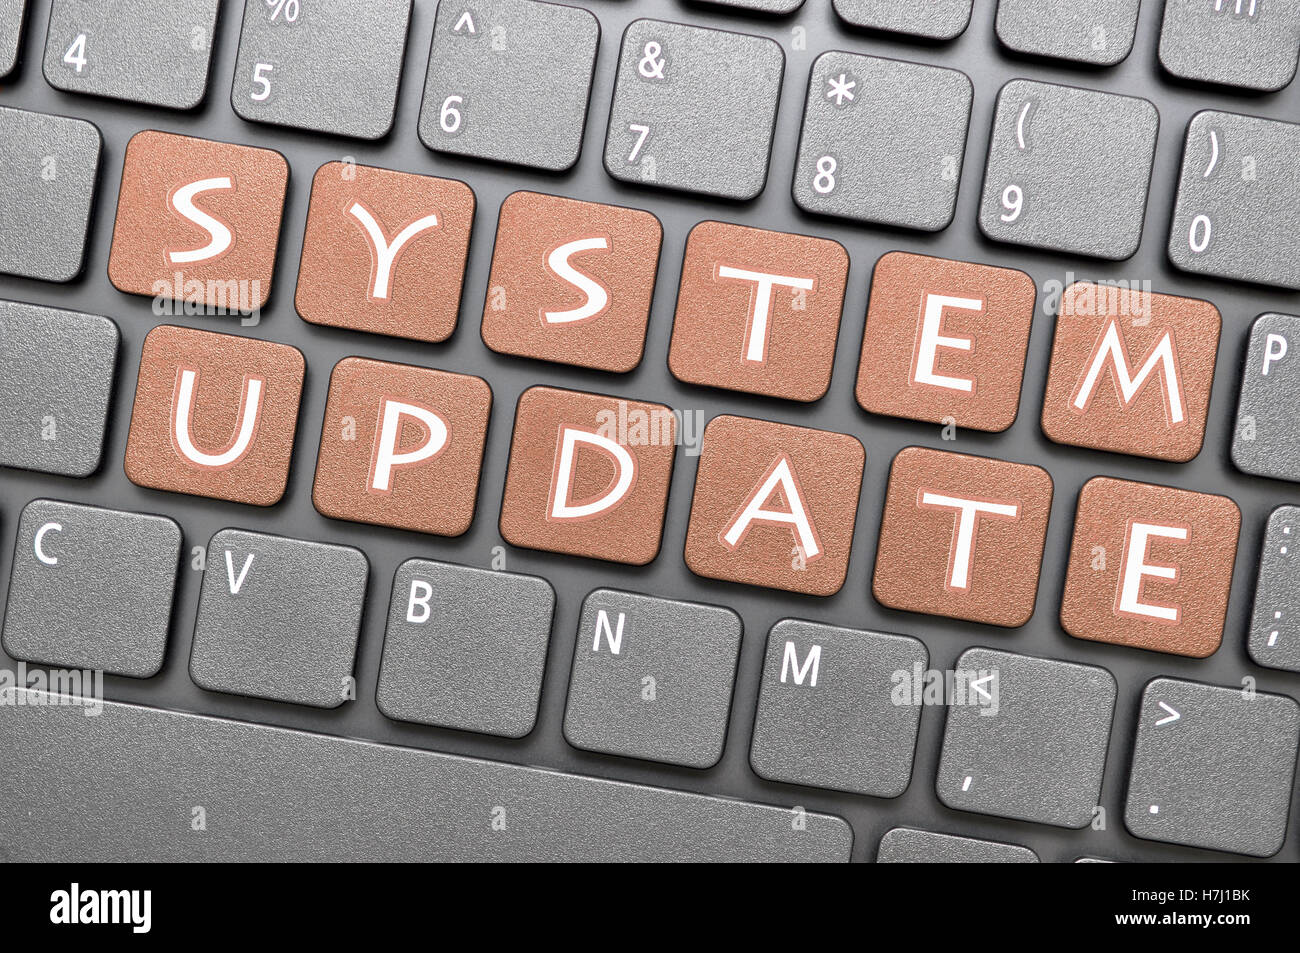 Brown system update key on keyboard Stock Photo